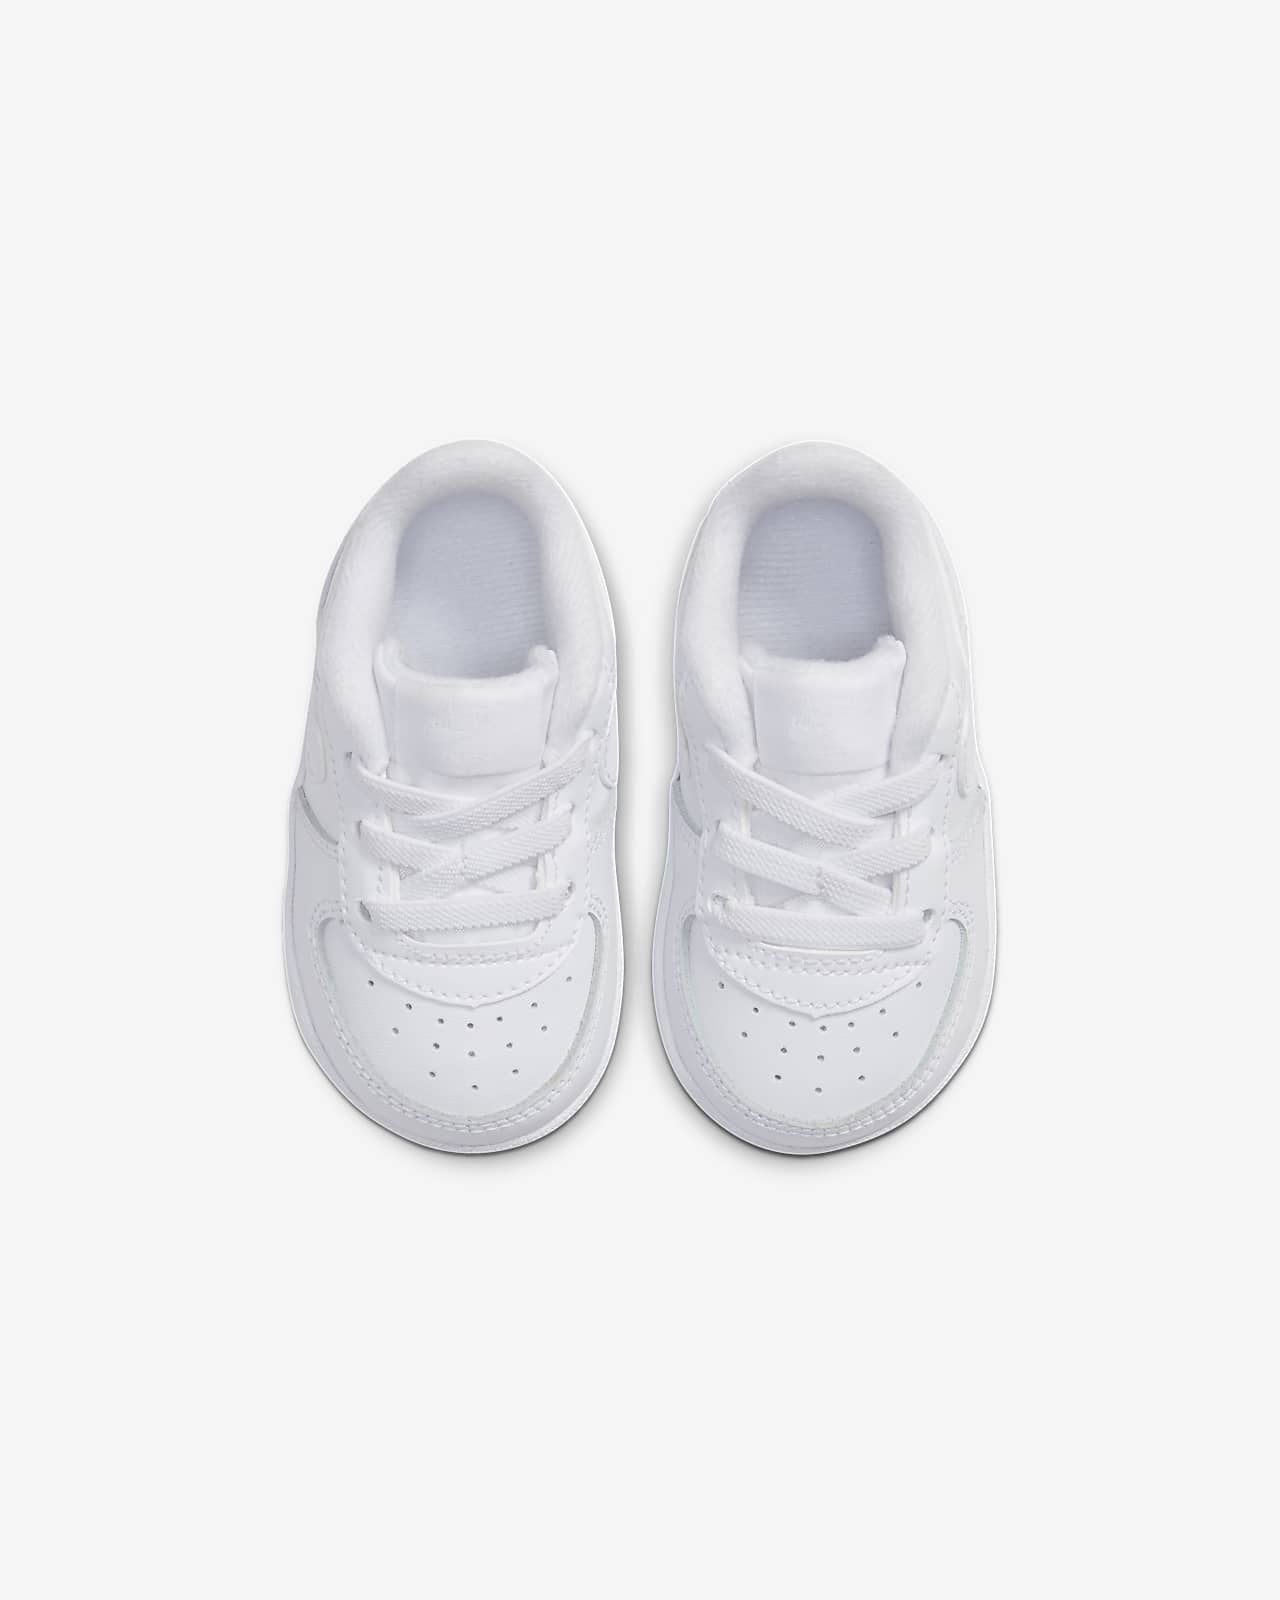 Nike Force 1 Cot Baby Bootie. Nike CA